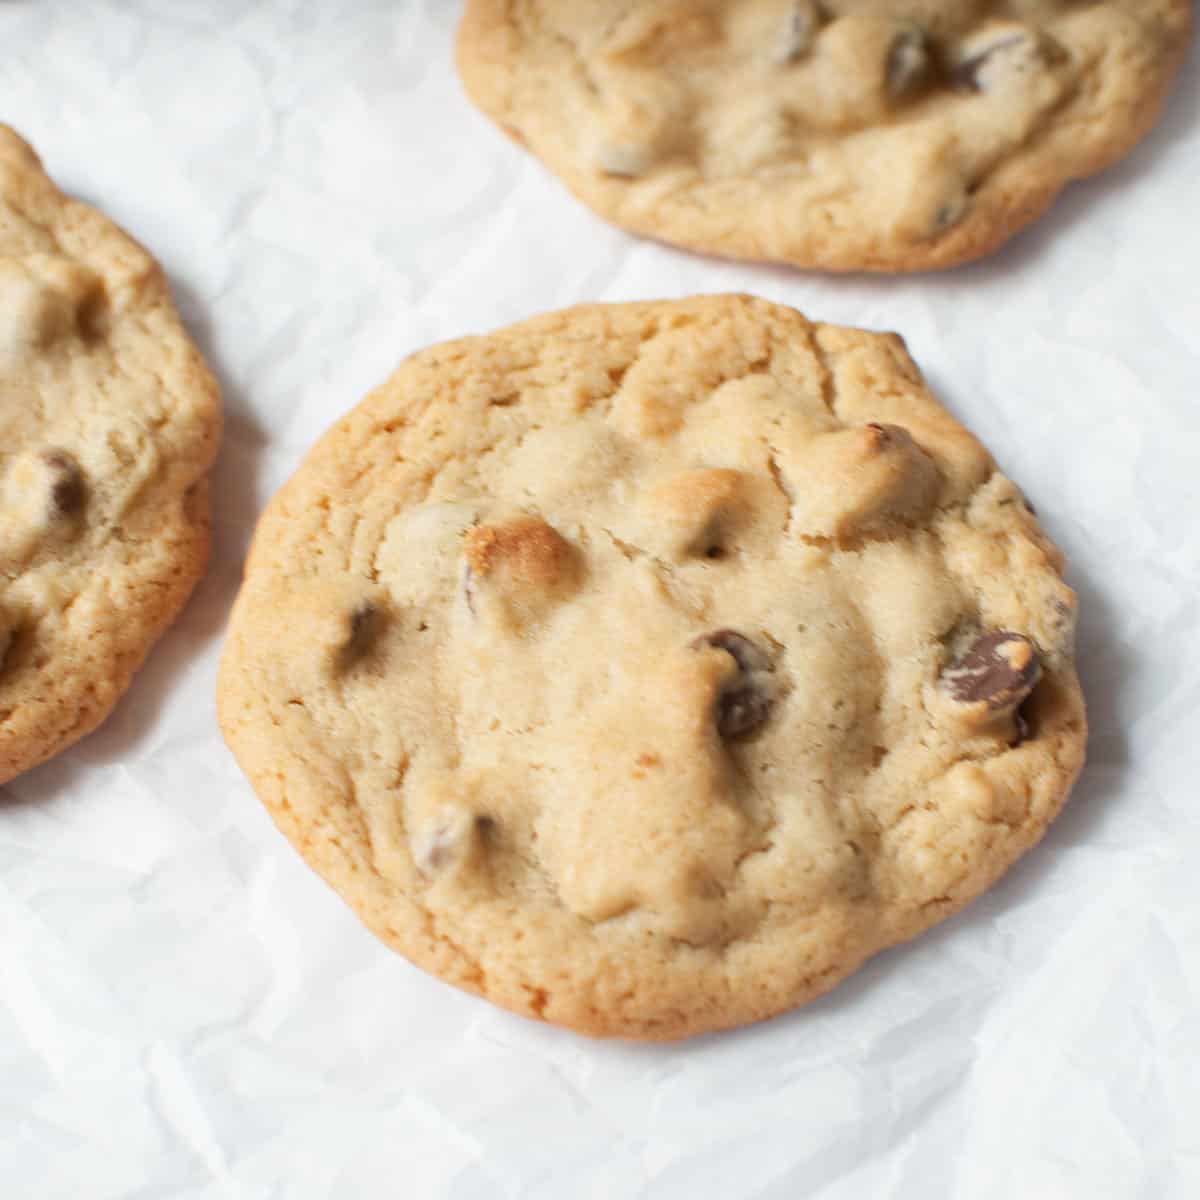 A chocolate chip cookie on a white background with two other cookies behind it.